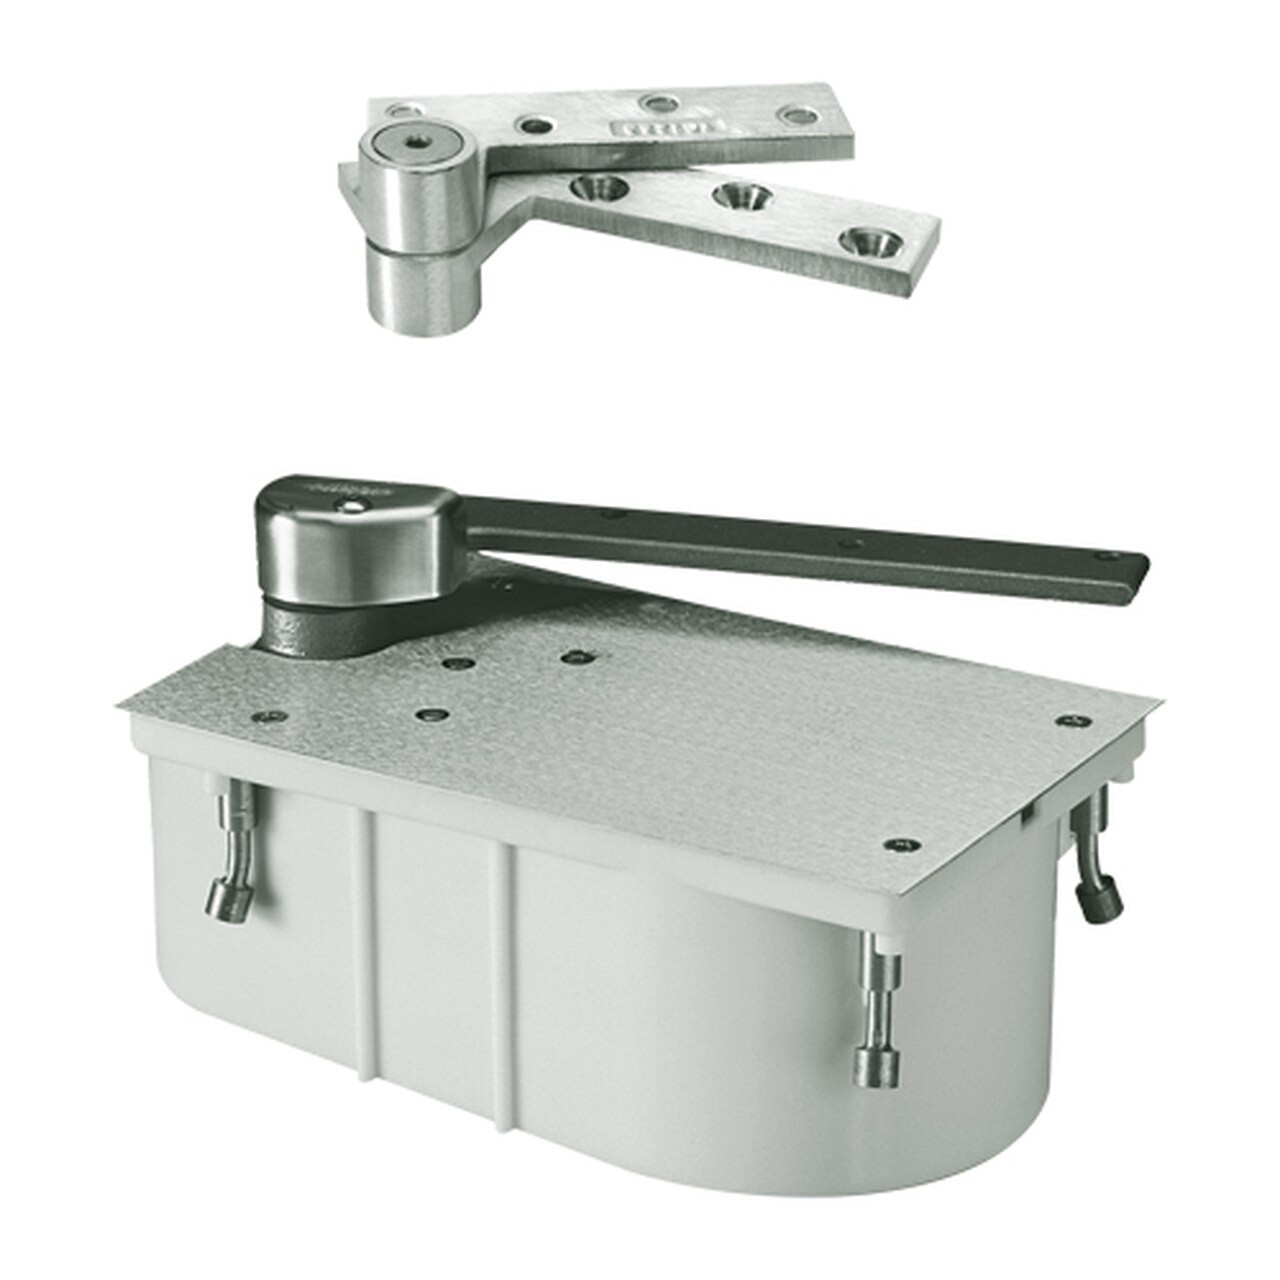 F27-95N-LFP-CWF-RH-619 Rixson 27 Series Fire Rated Heavy Duty 3/4" Offset Hung Floor Closer in Satin Nickel Finish